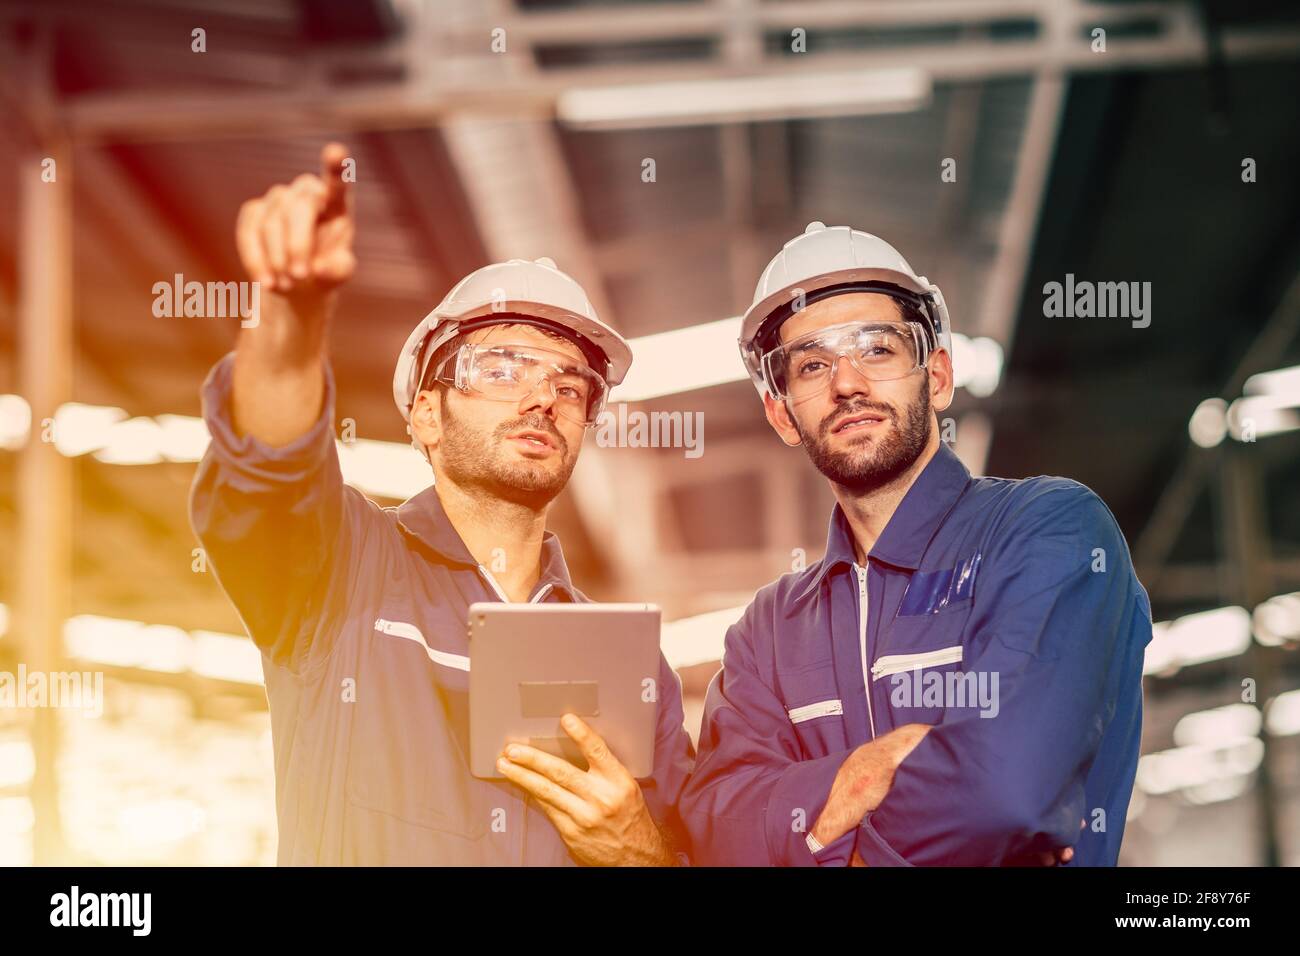 Engineer worker friend people team working discussion help support together at work in heavy industry factory. Stock Photo